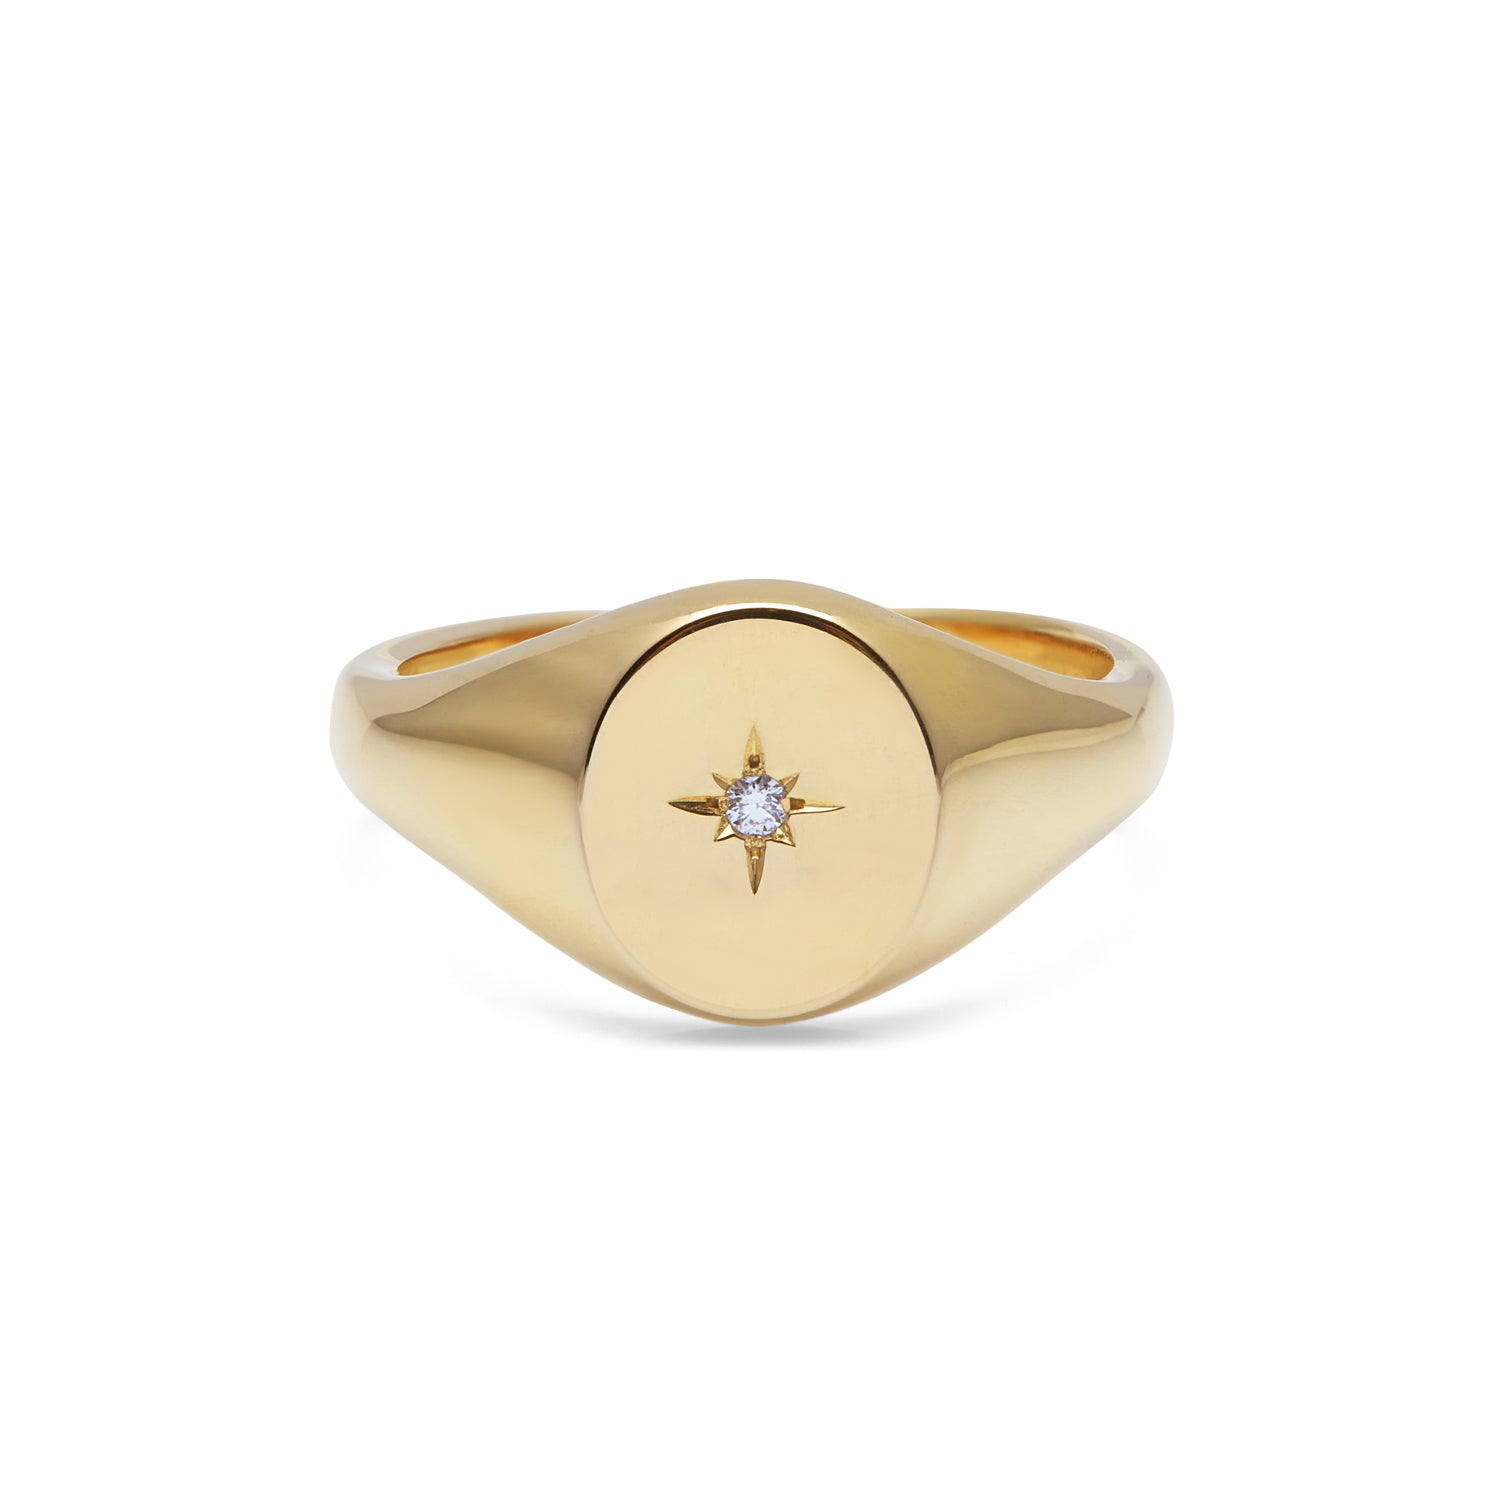 Oval Signet Ring with Star Set Diamond 11x9mm - 9K Yellow Gold